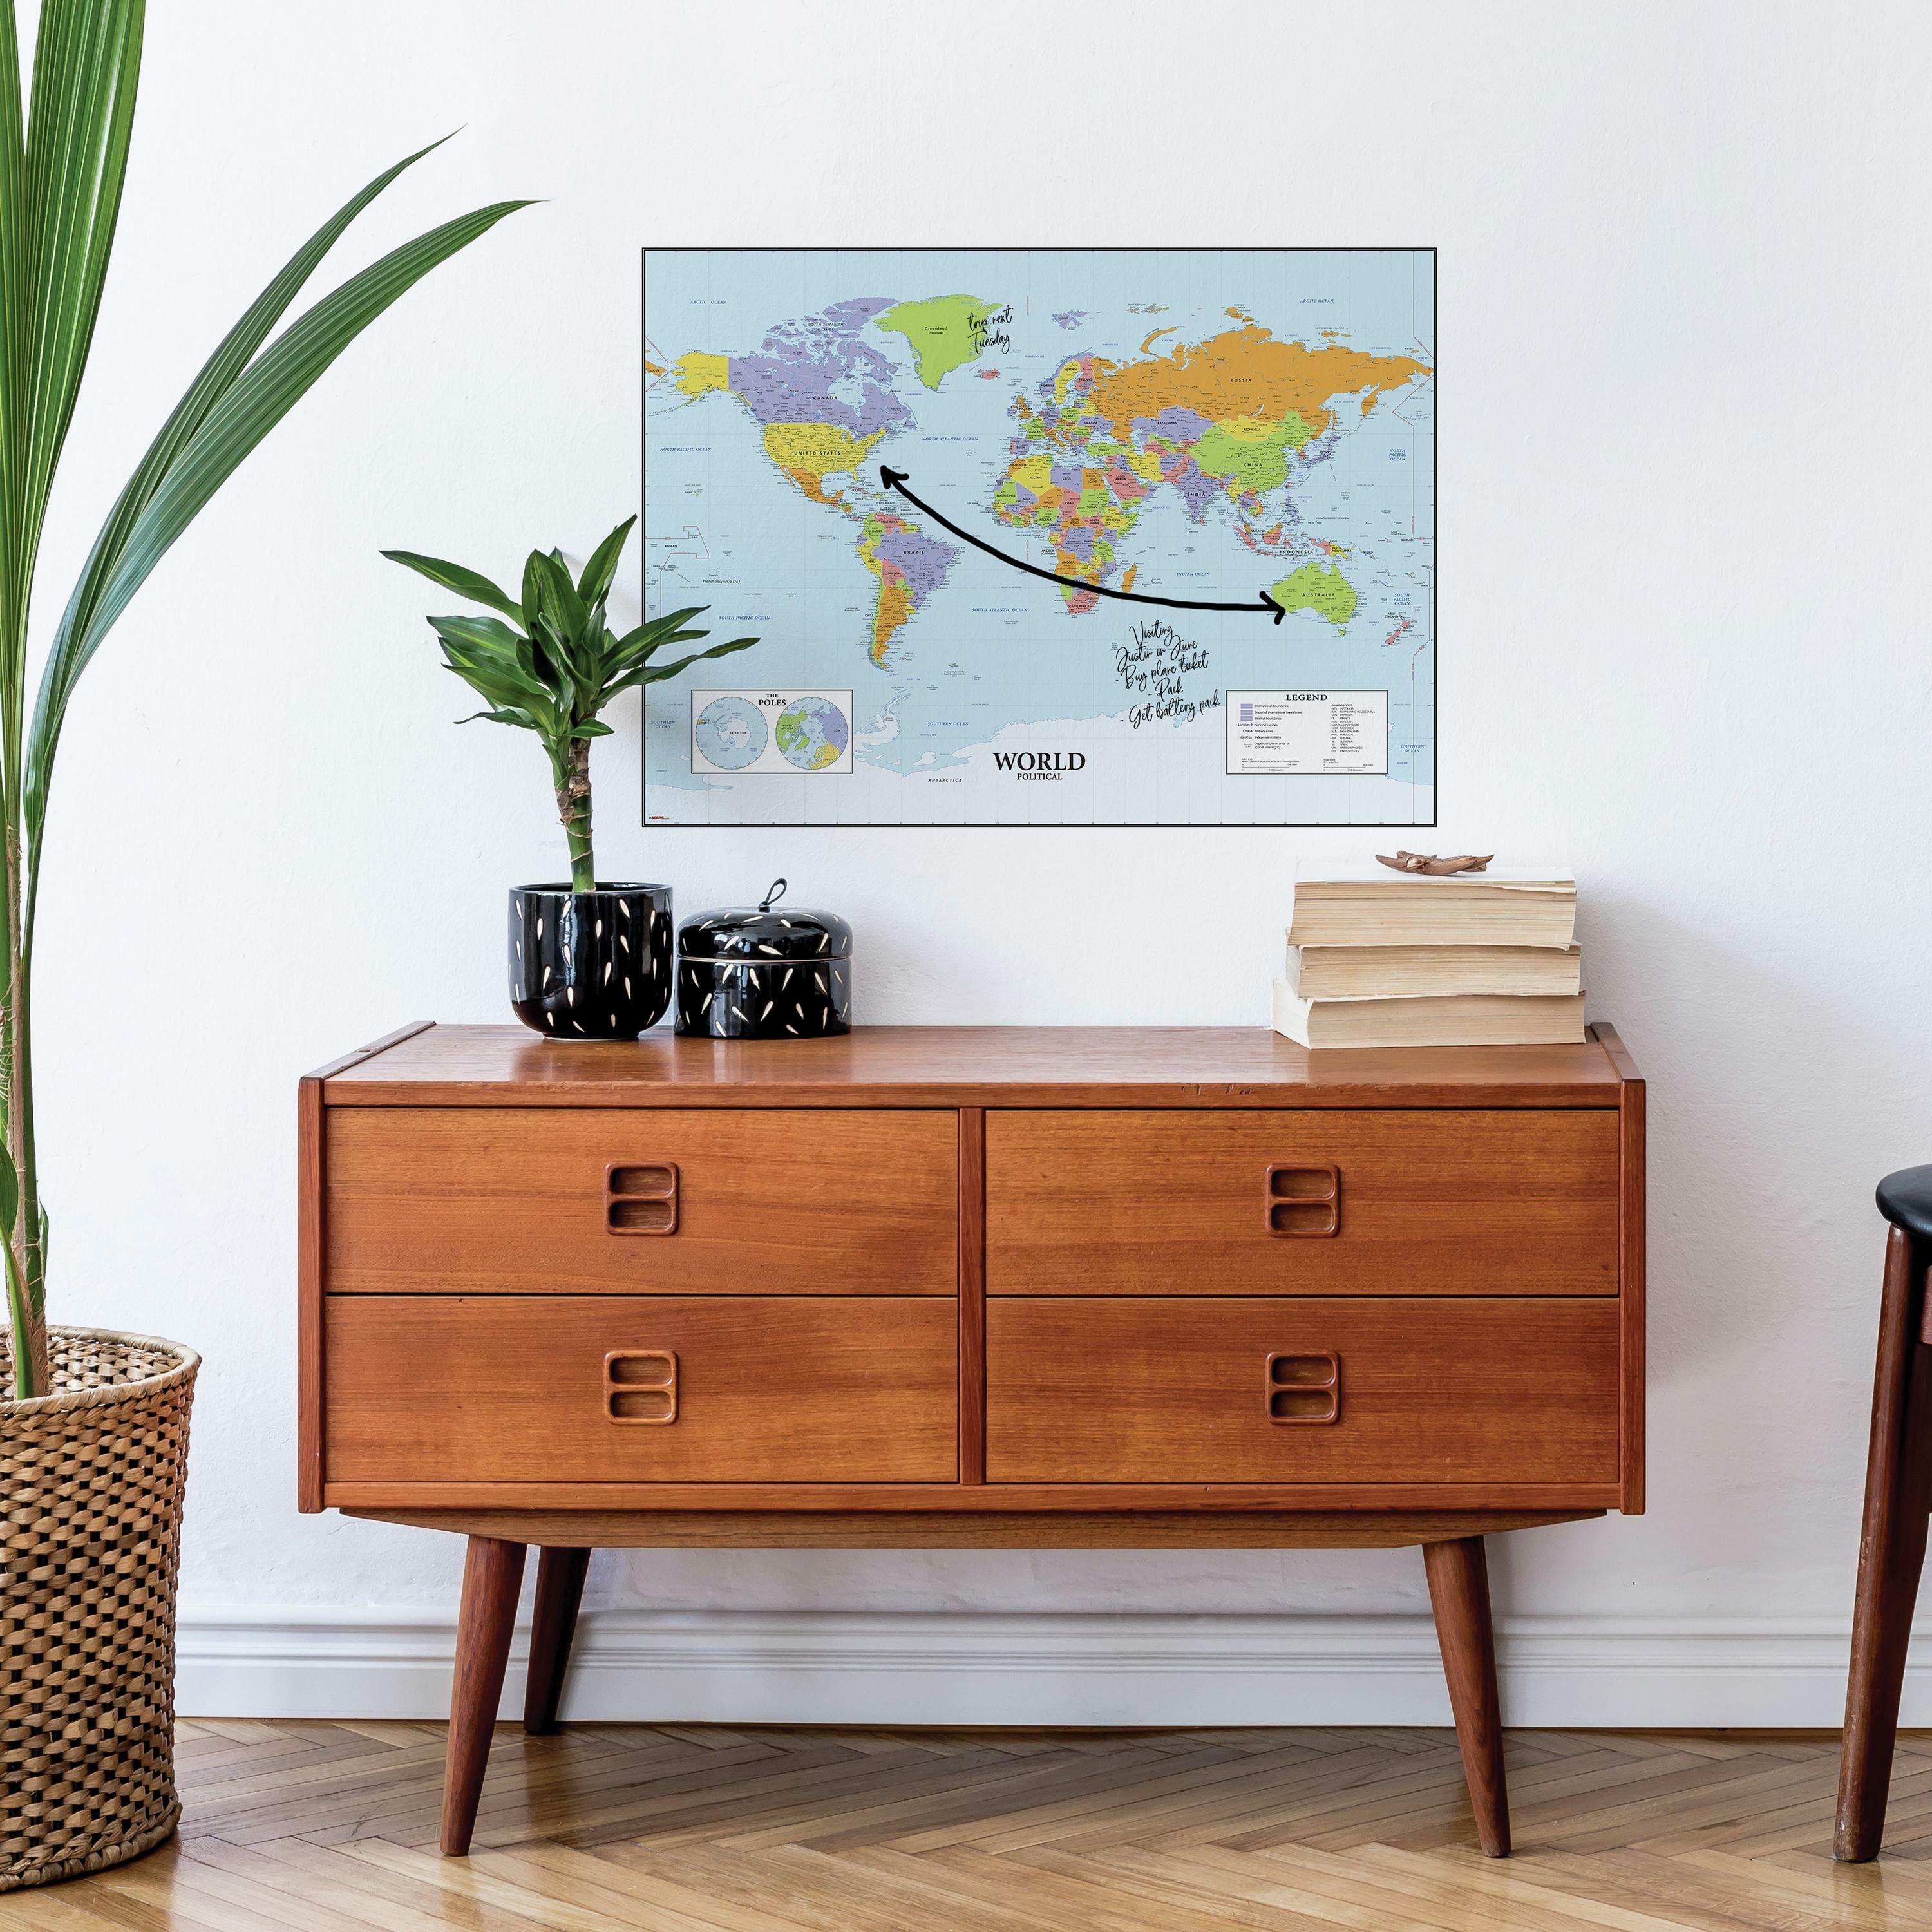 RoomMates Dry-Erase Map Of The World Peel And Stick Wall Decal